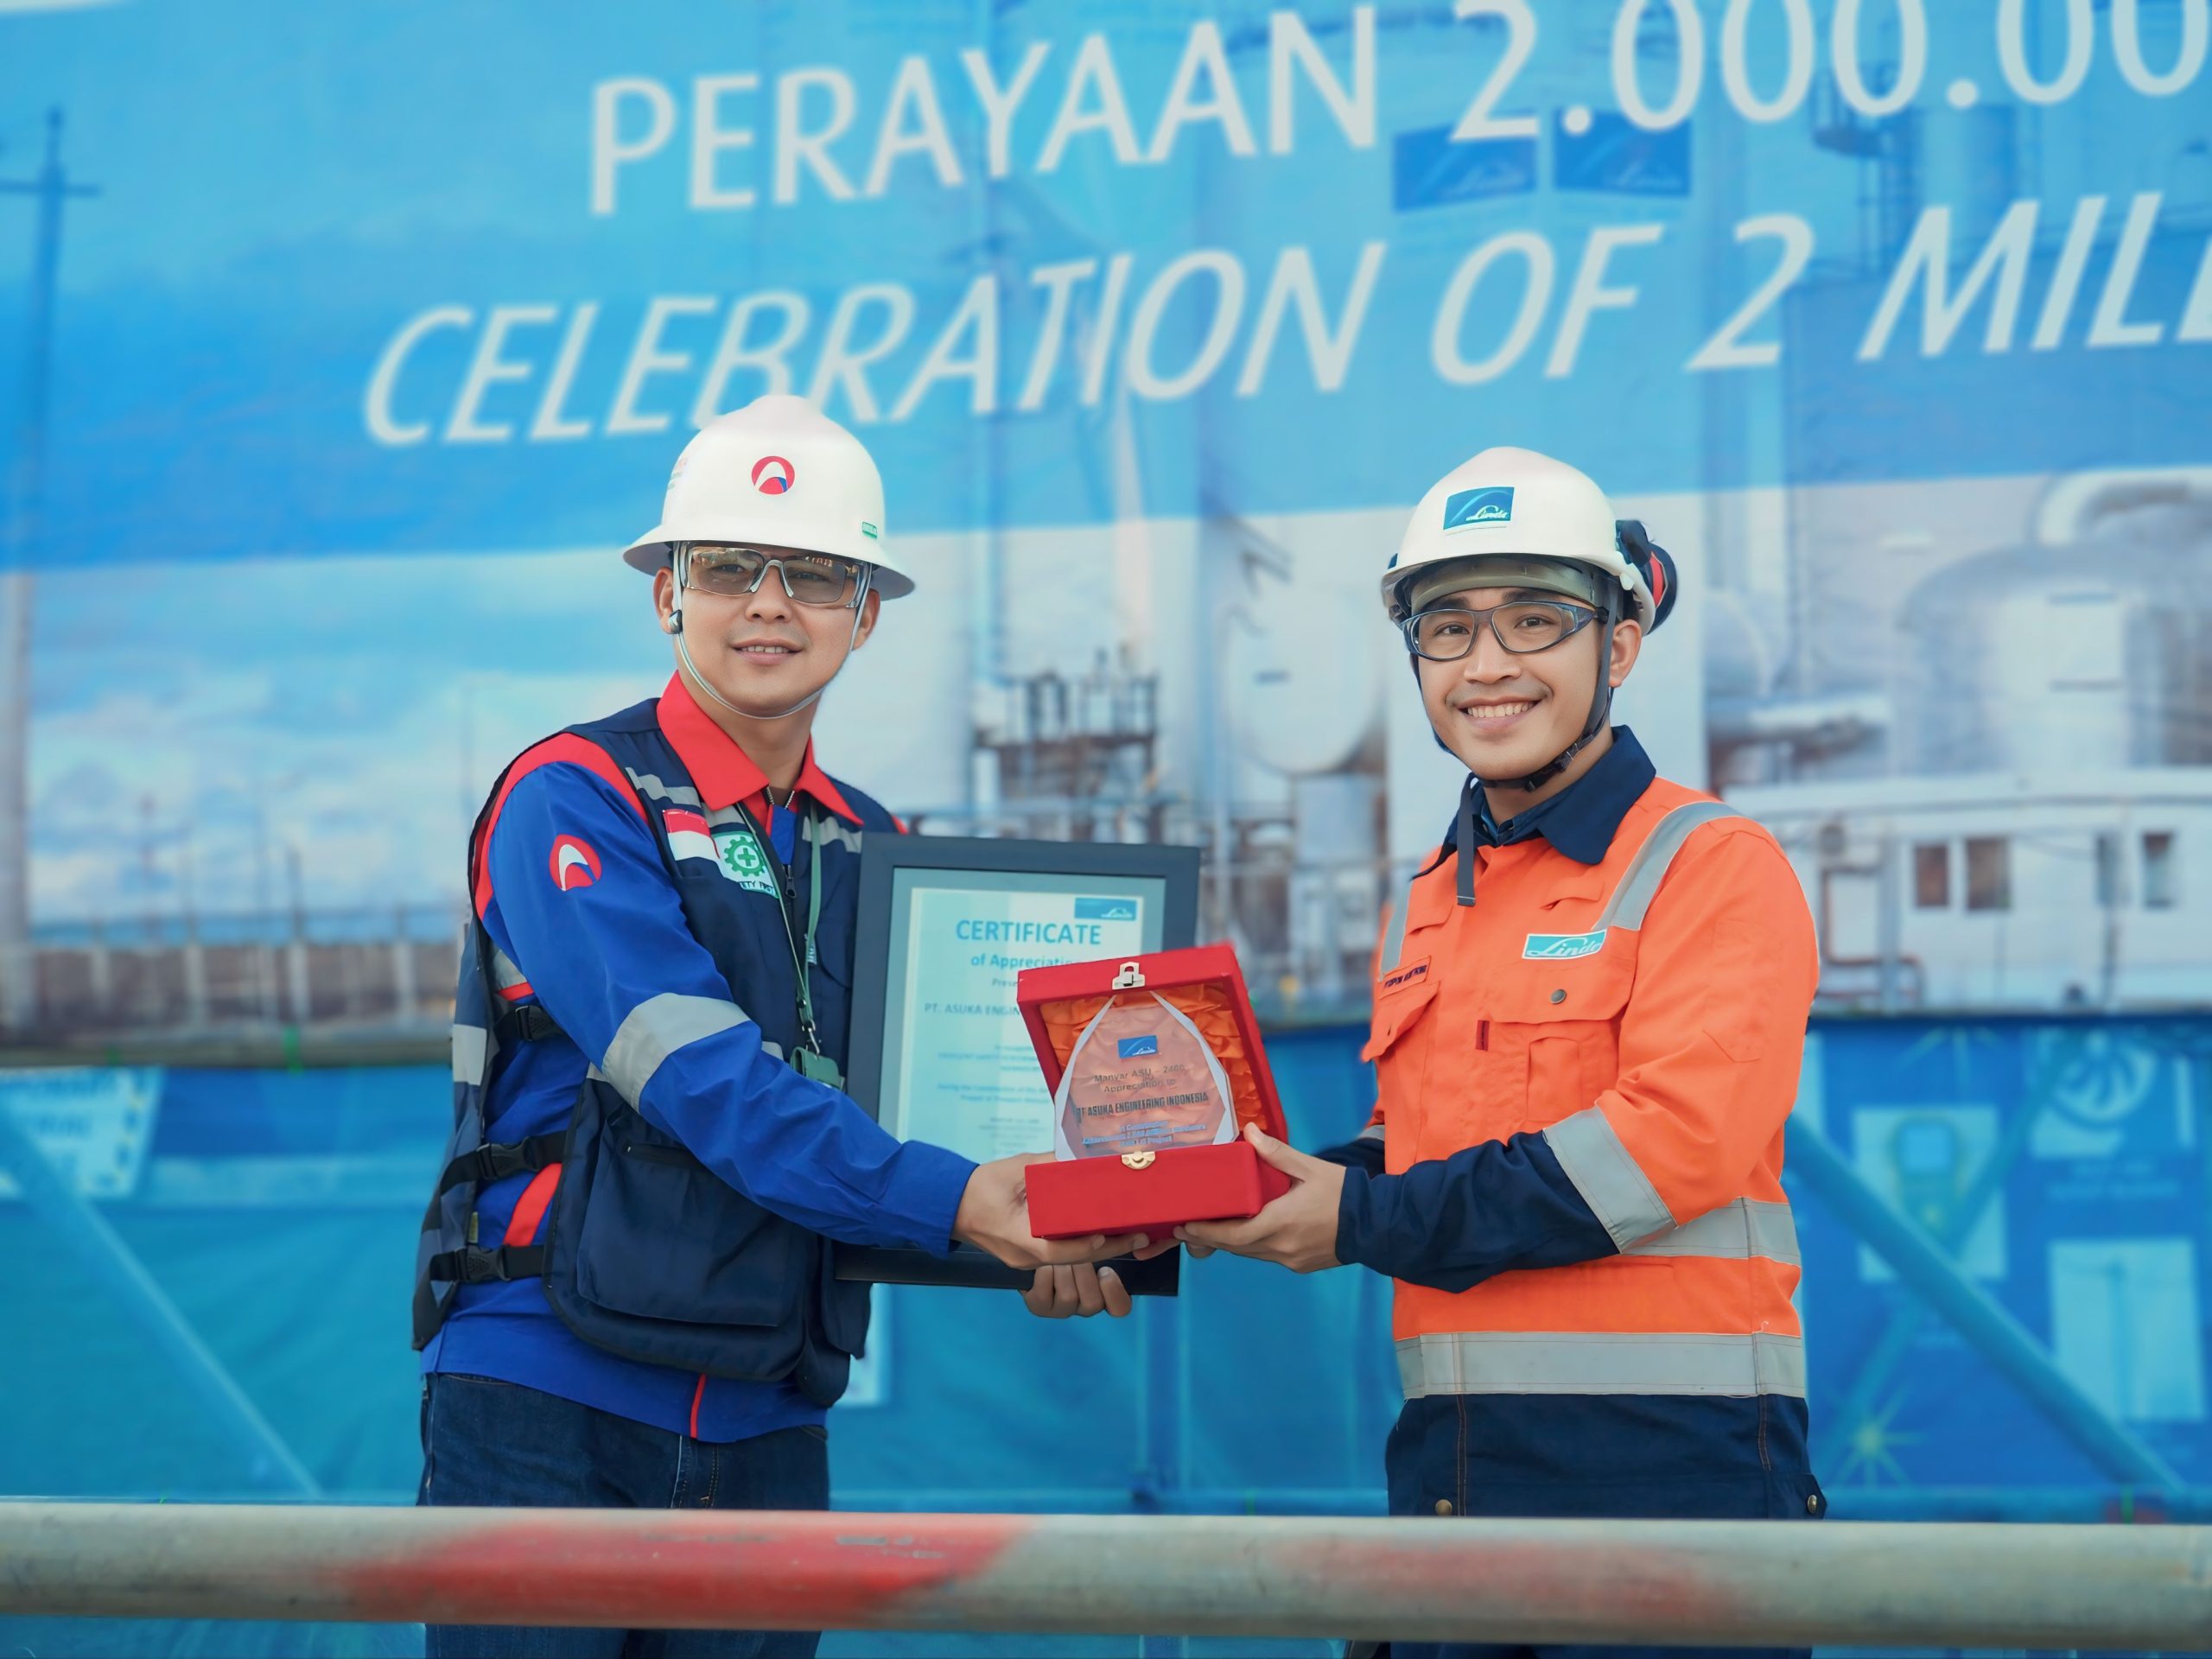 You are currently viewing Celebration of 2 Million Safe Manhours at Linde- JAVA LG Project